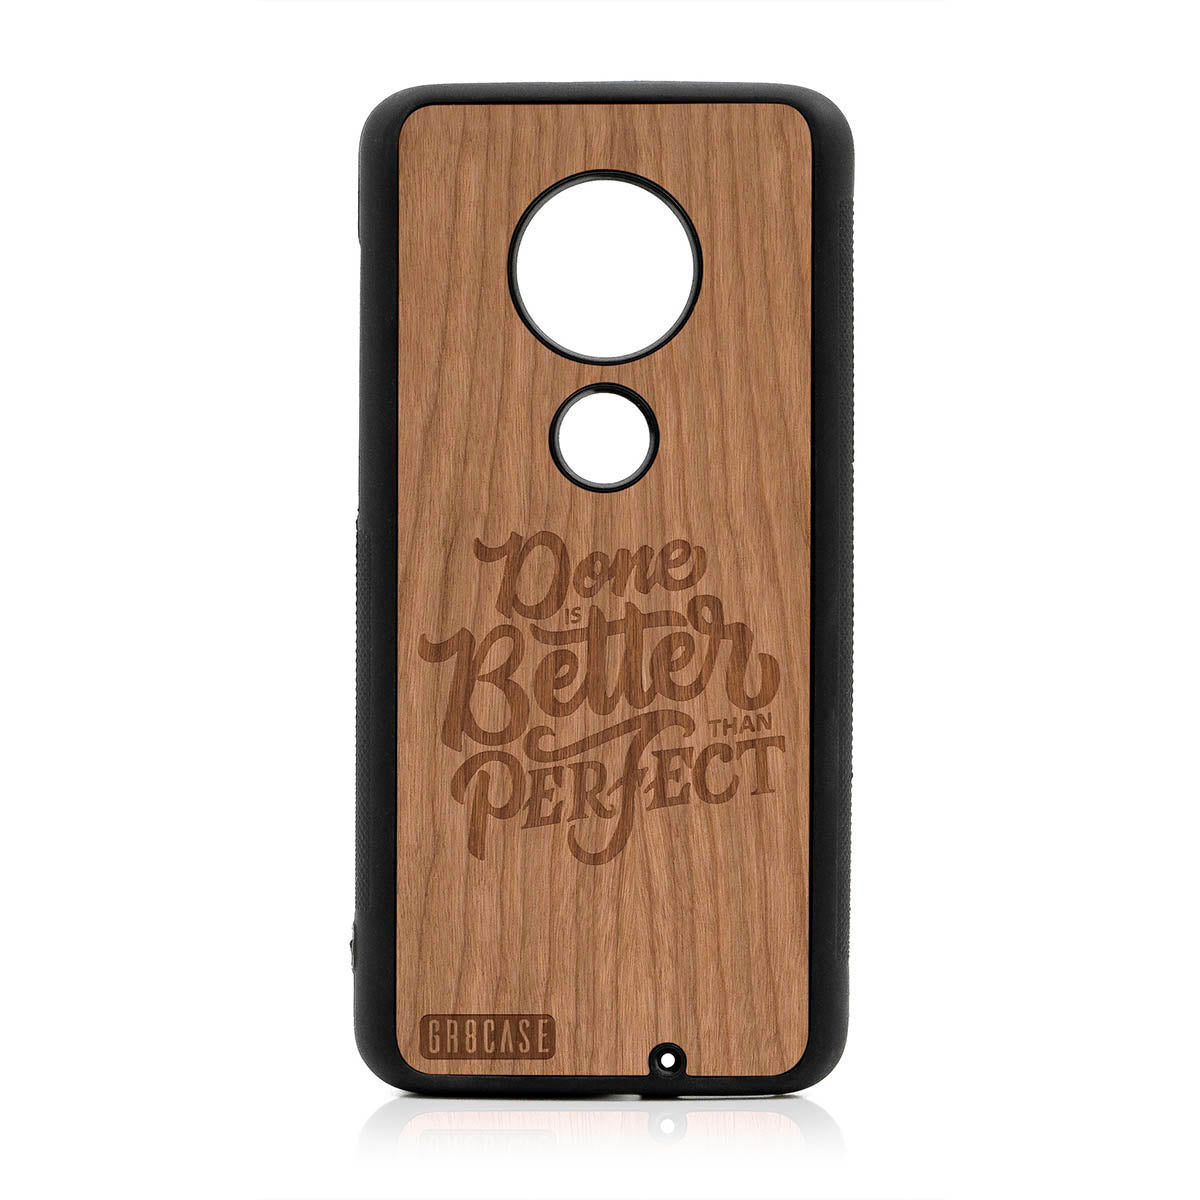 Done Is Better Than Perfect Design Wood Case For Moto G7 Plus by GR8CASE